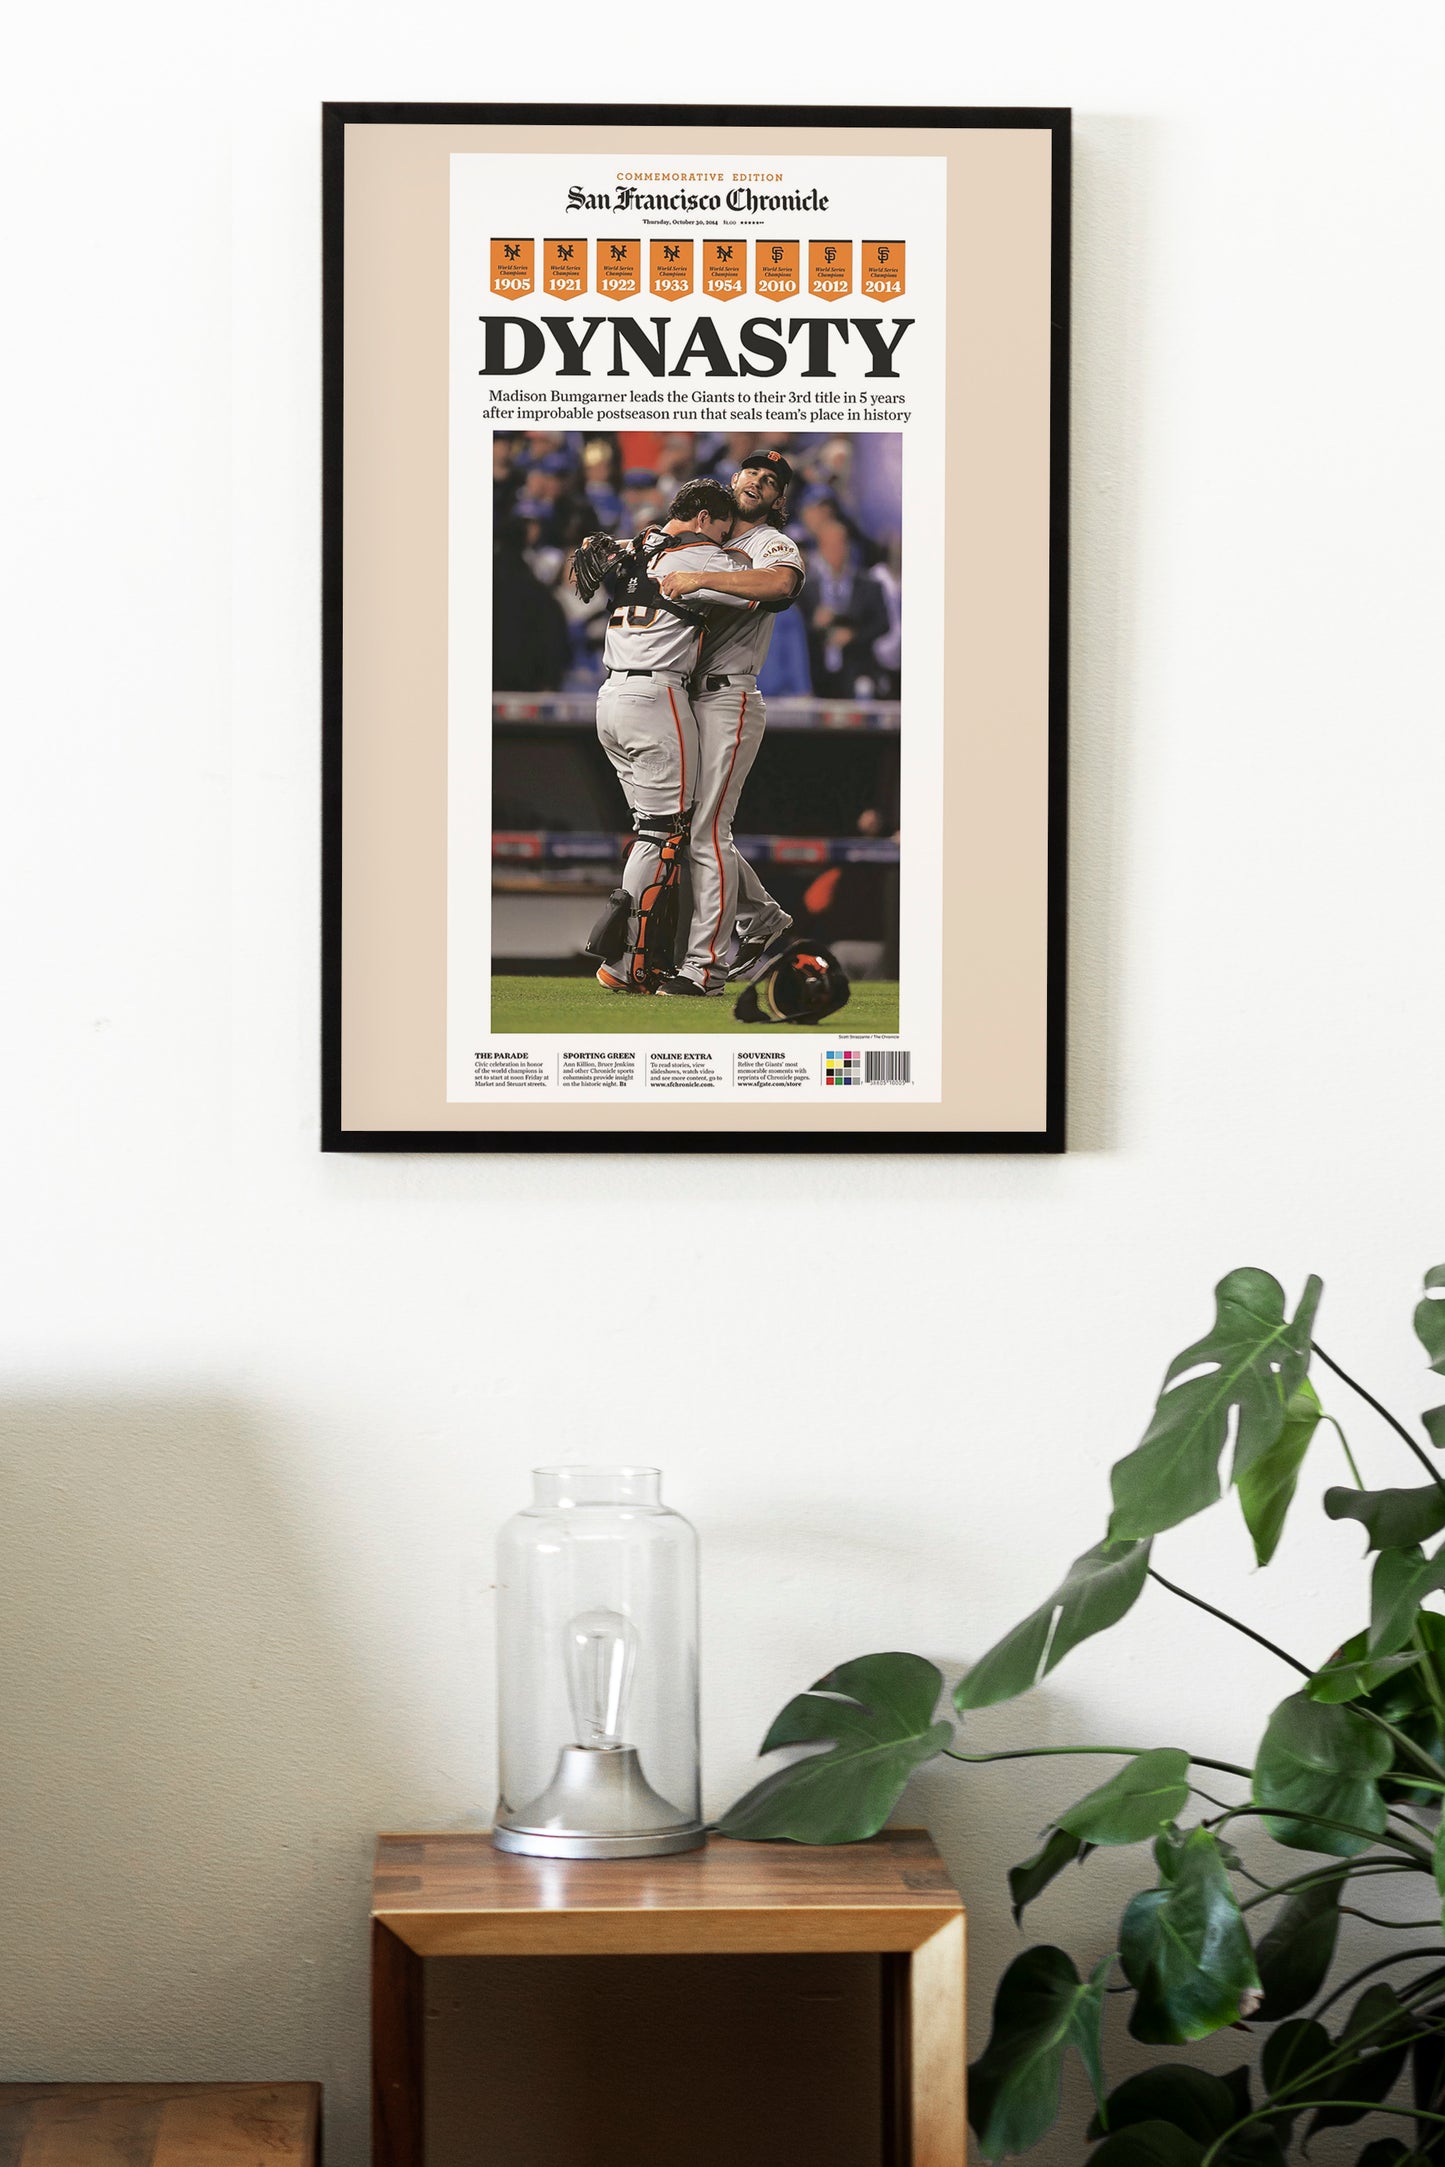 San Francisco Giants 2014 World Series MLB Champions Front Cover San Francisco Chronicle Newspaper Poster